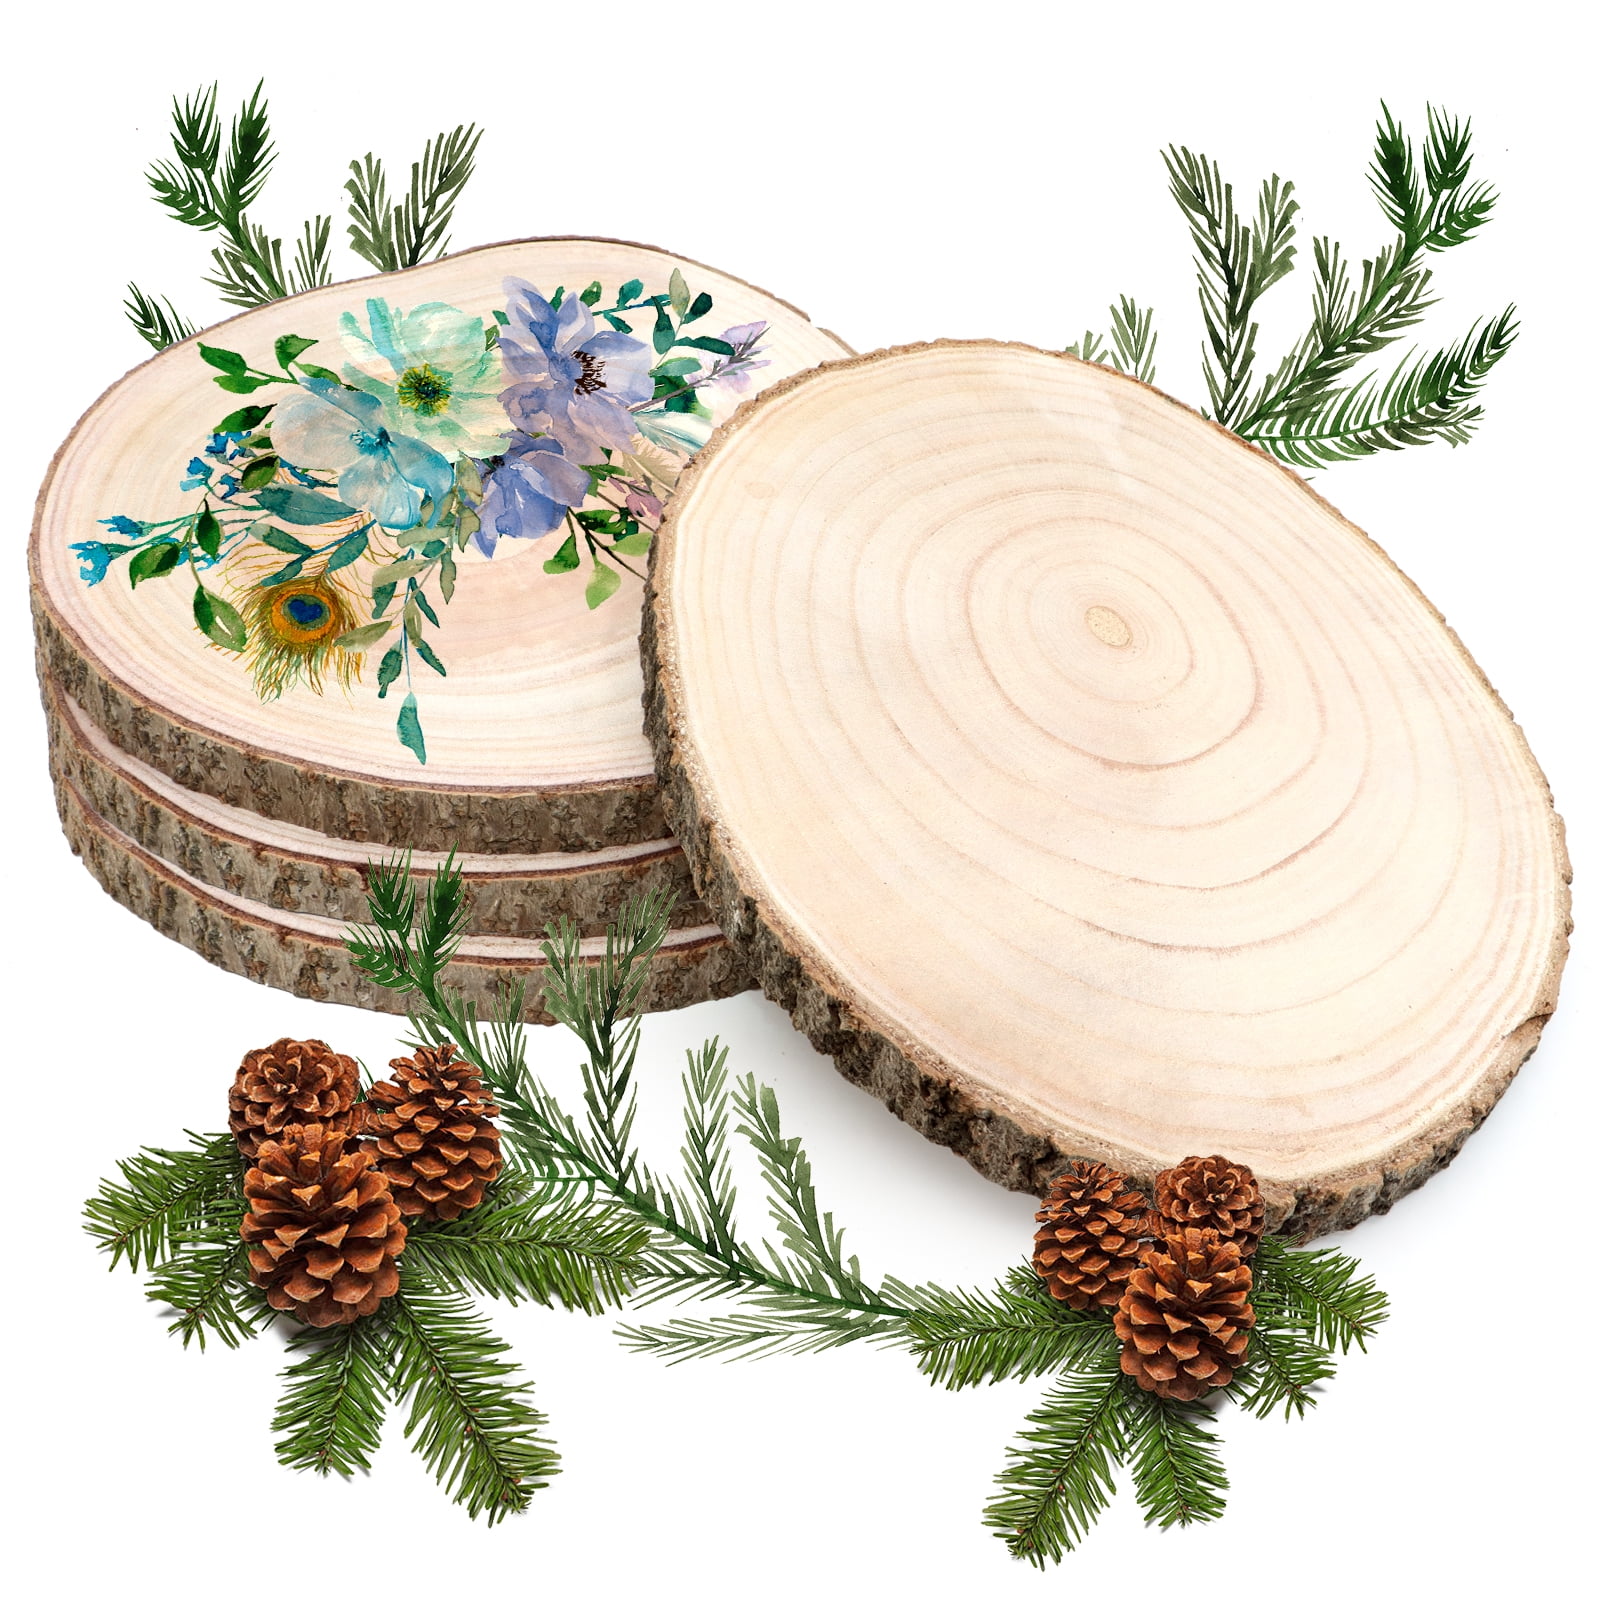 VEGCOO Large Wood Slices 4 Pcs 11-13 Inches Unfinished Wood Rounds, Natural  Paulownia Wood Slices for Centerpieces, Wood Pieces Decoration with Bark,  DIY Wooden Ornaments for Wedding, Painting 